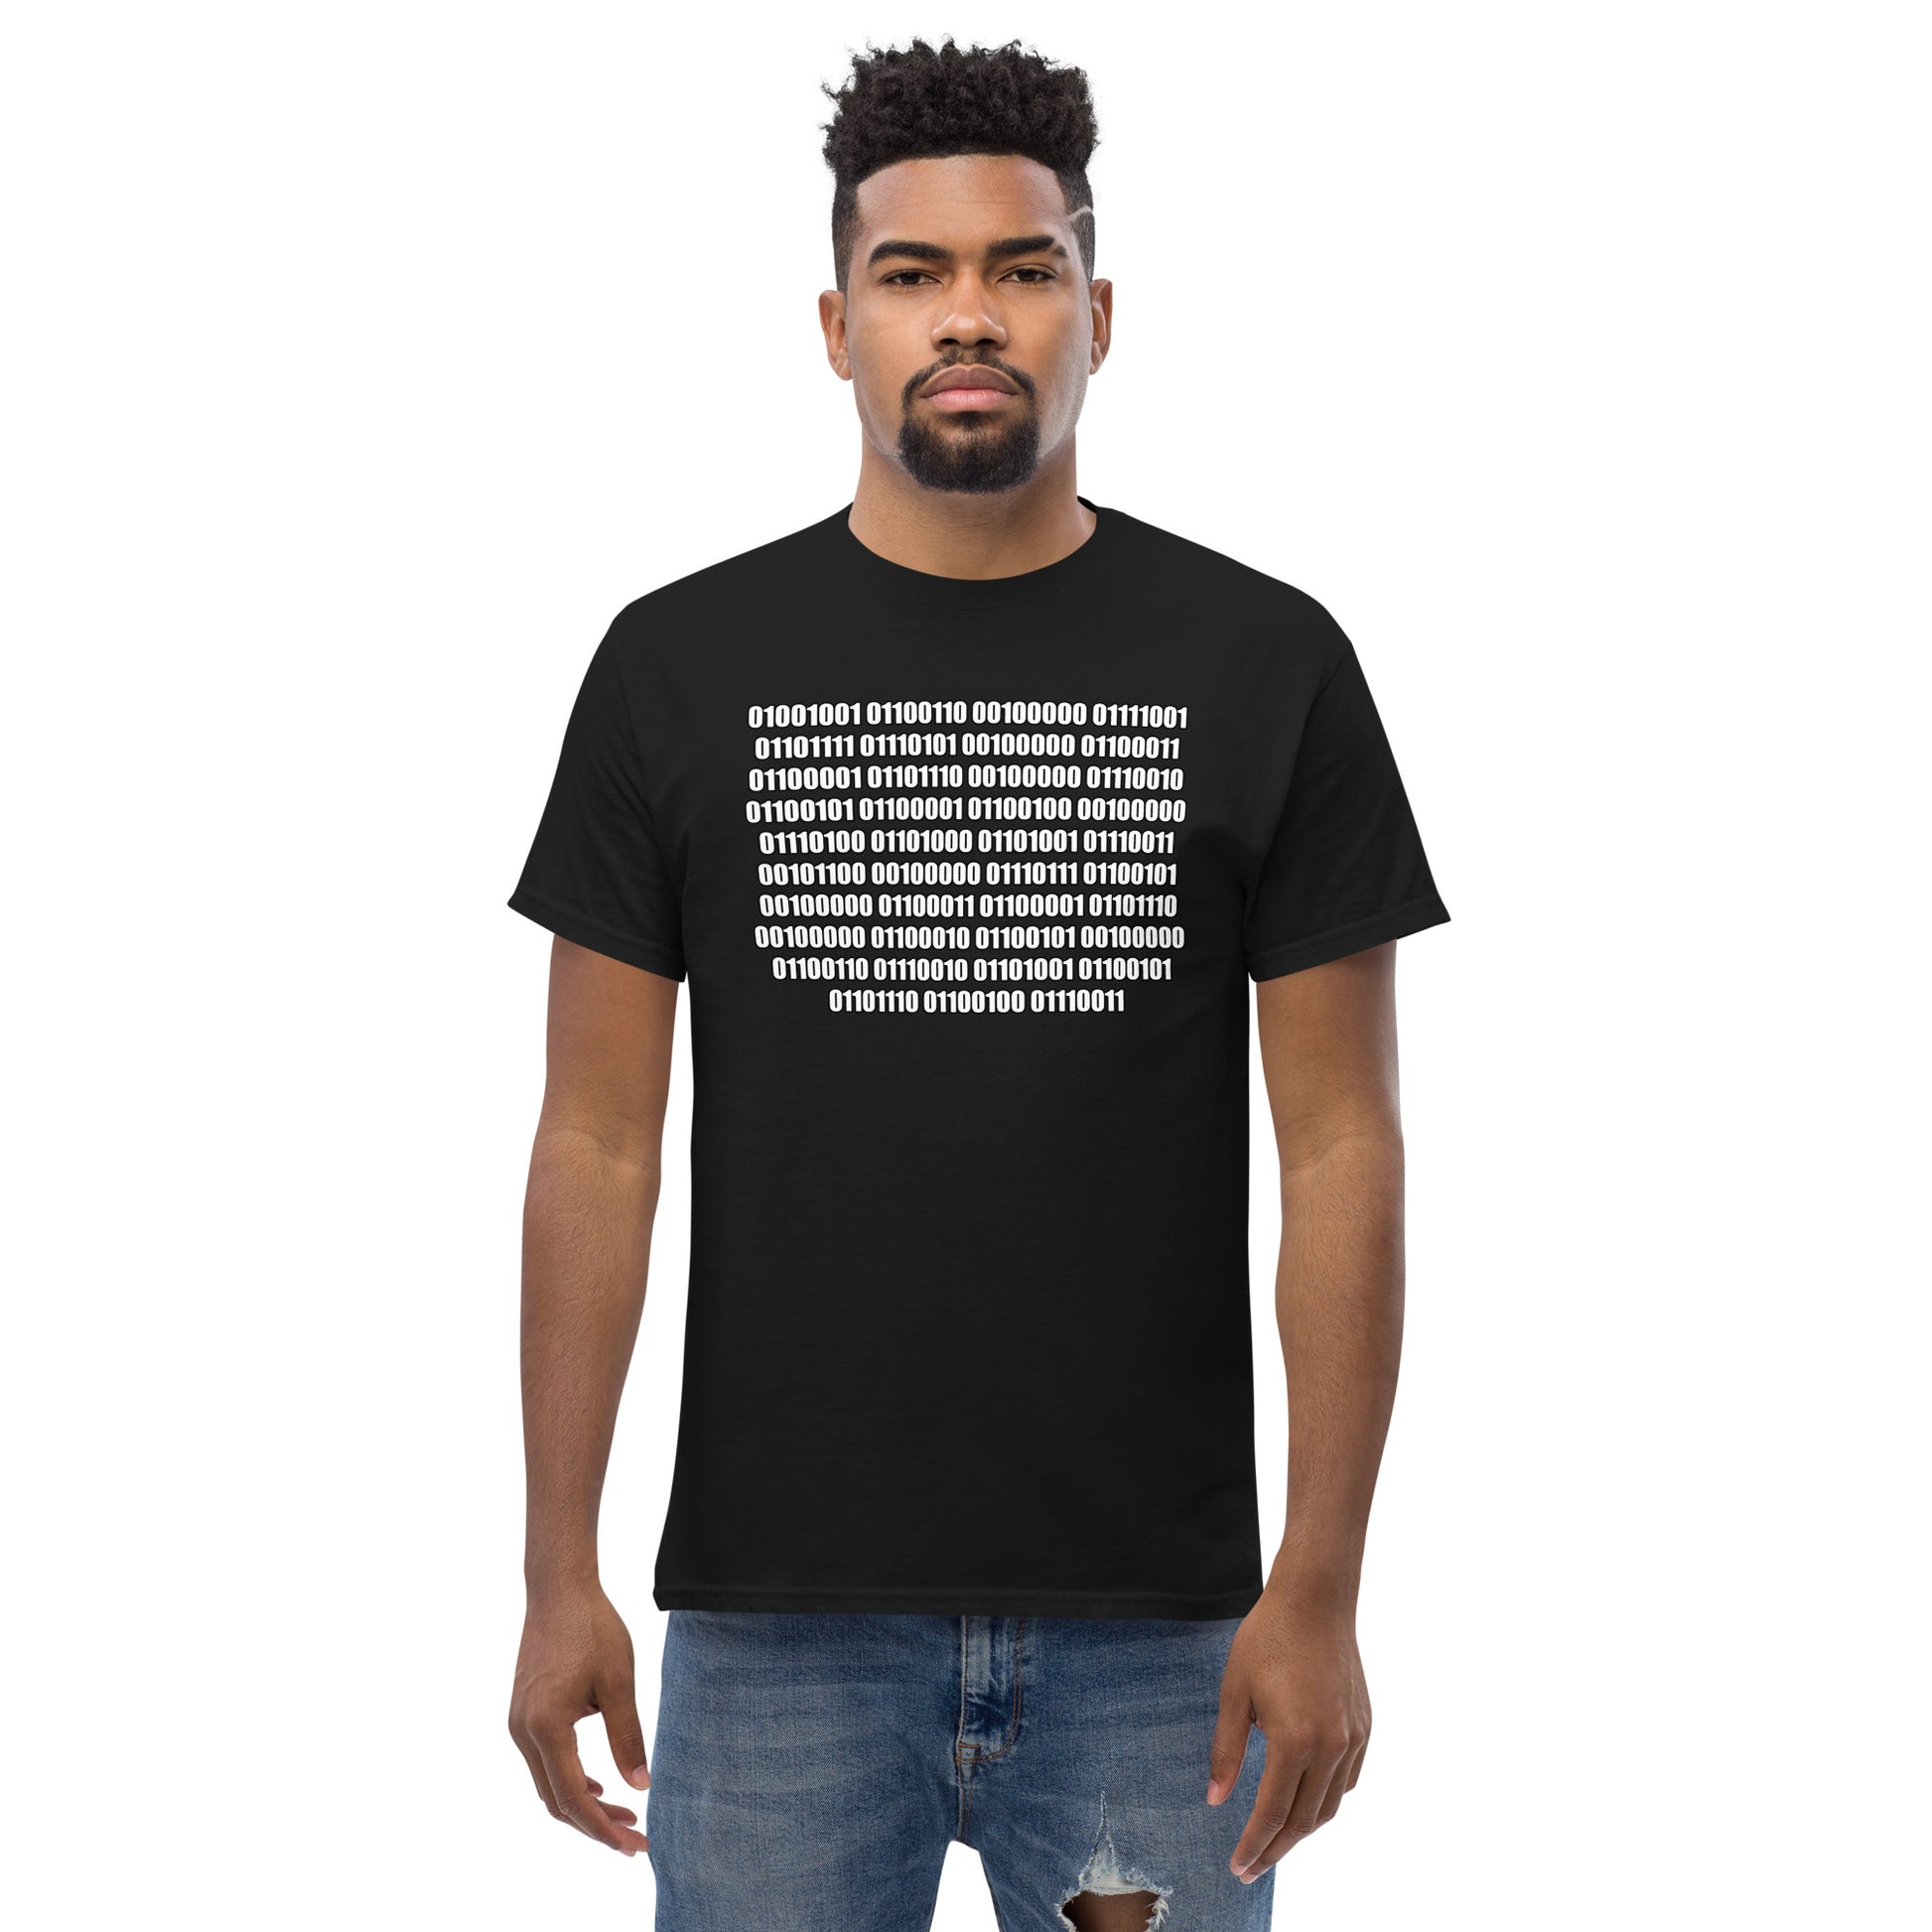 Men with black t-shirt with binaire text "If you can read this"